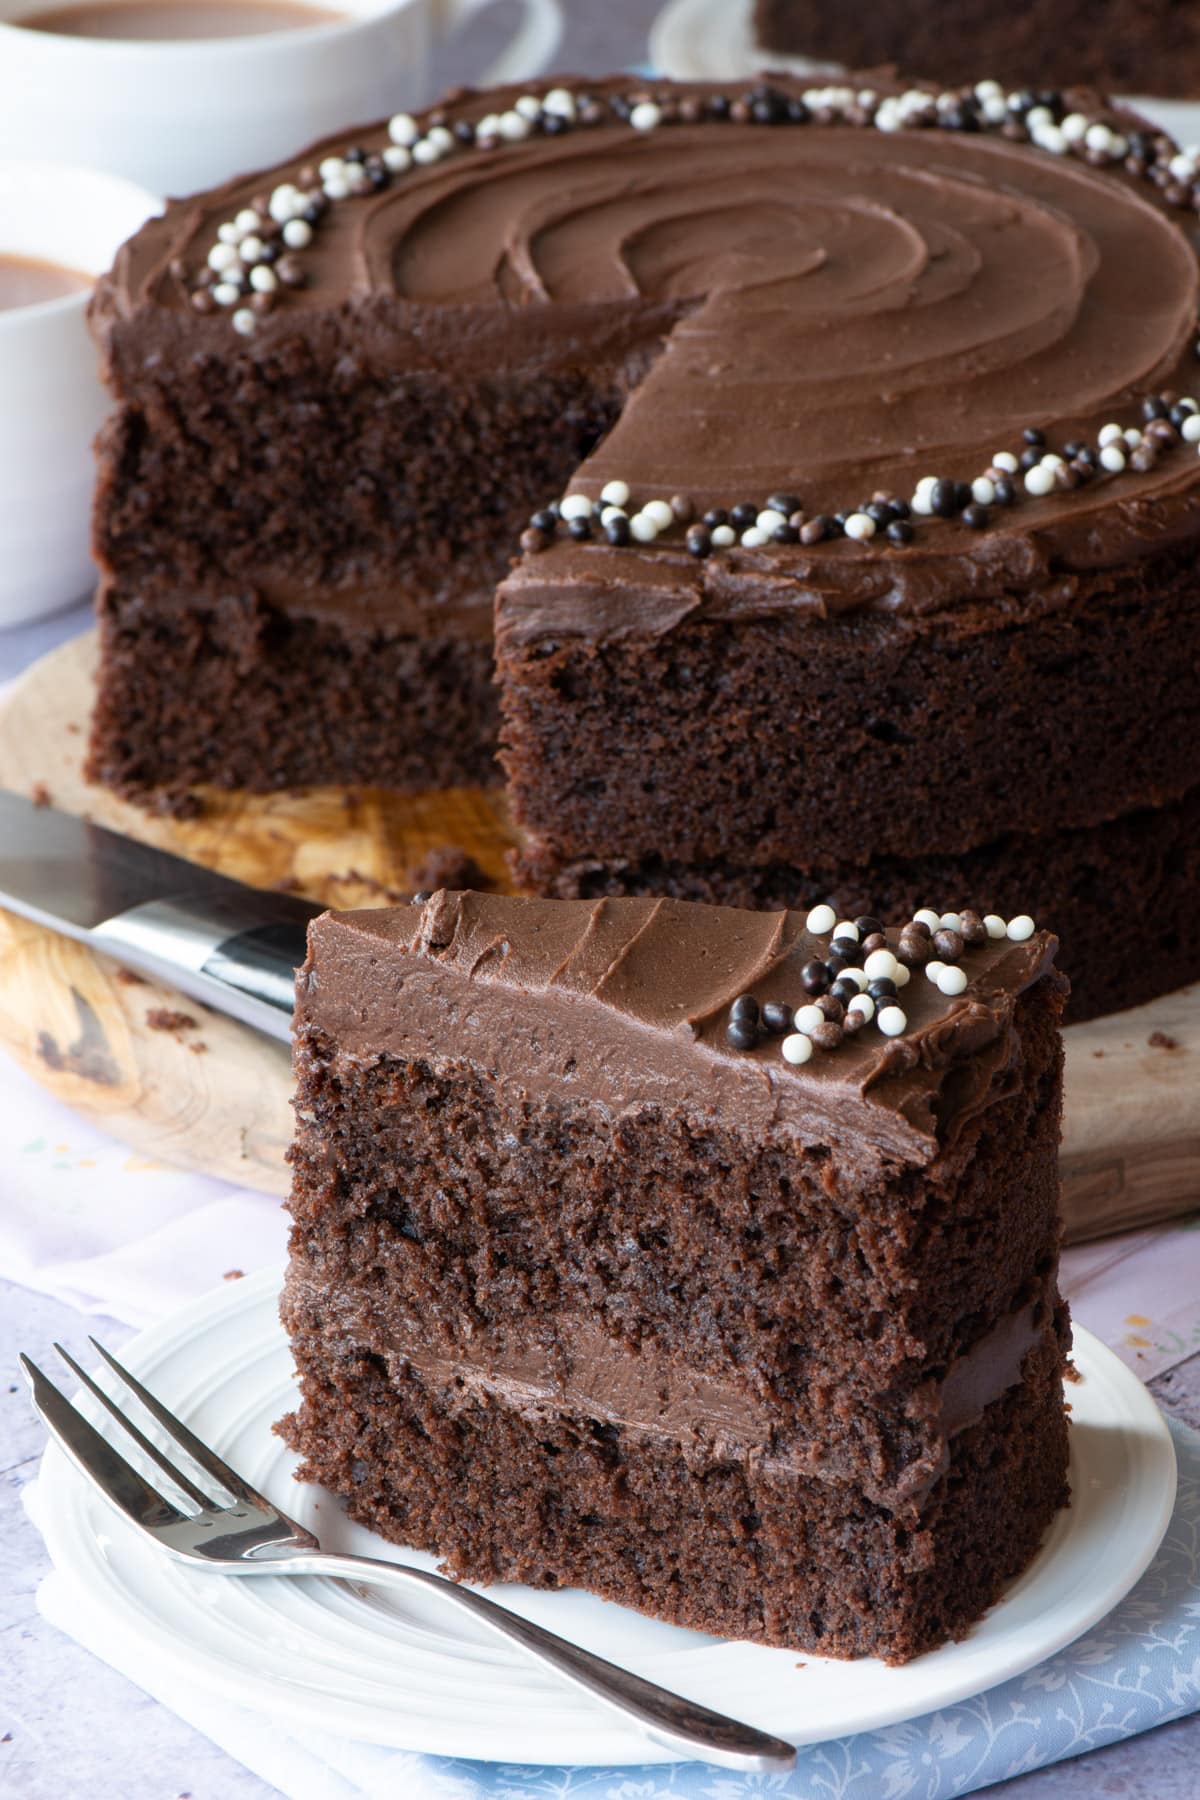 An easy chocolate cake that's moist, delicious and packed full of chocolate.  It can be made in any size of round, square or rectangular tin so you can use whatever tins you have in the cupboard, and can feed a few or a whole crowd.